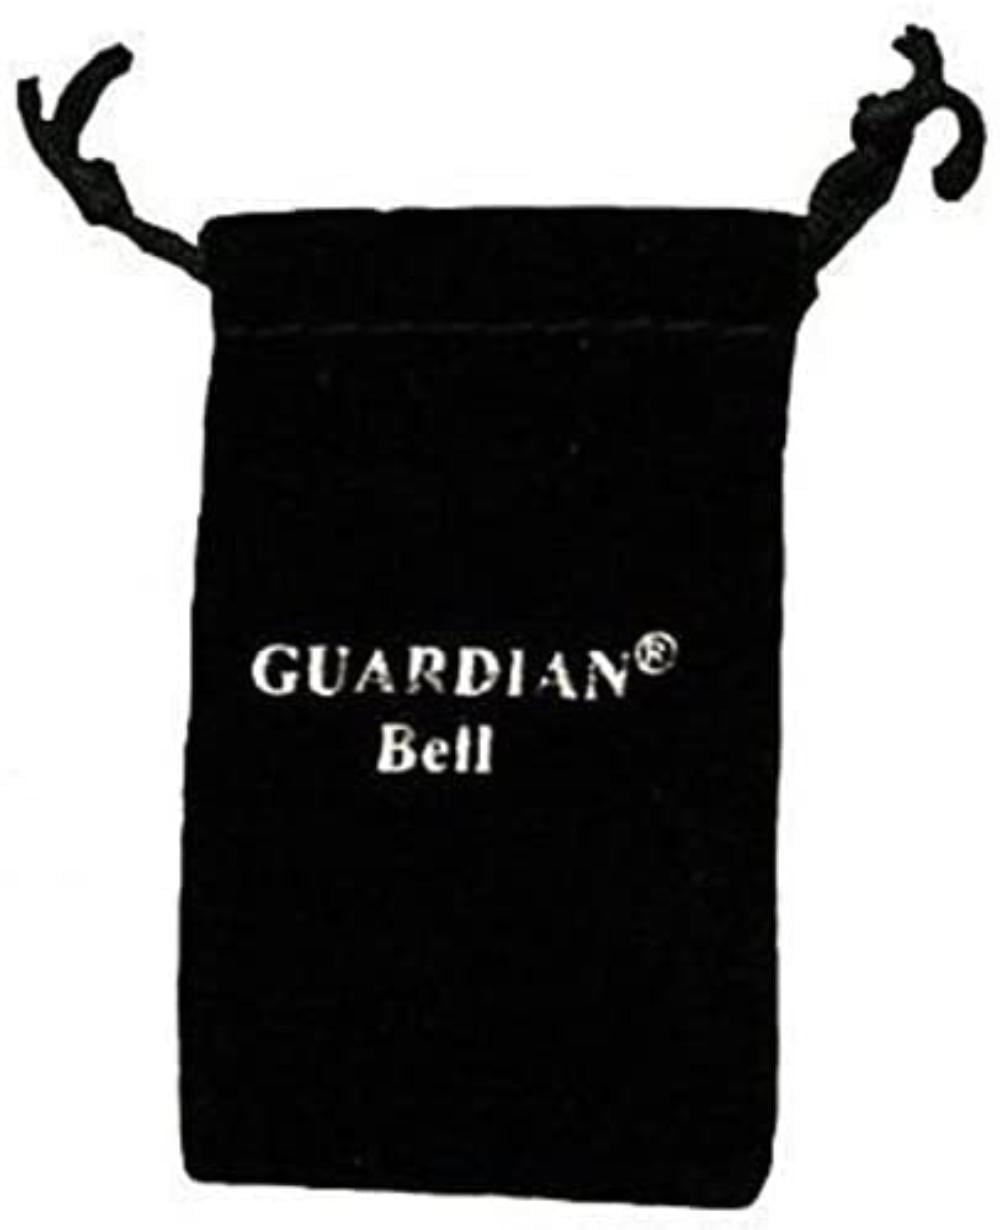 GUARDIAN BELL ELEPHANT COMPLETE MOTORCYCLE KIT W/ HANGER & WRISTBAND 